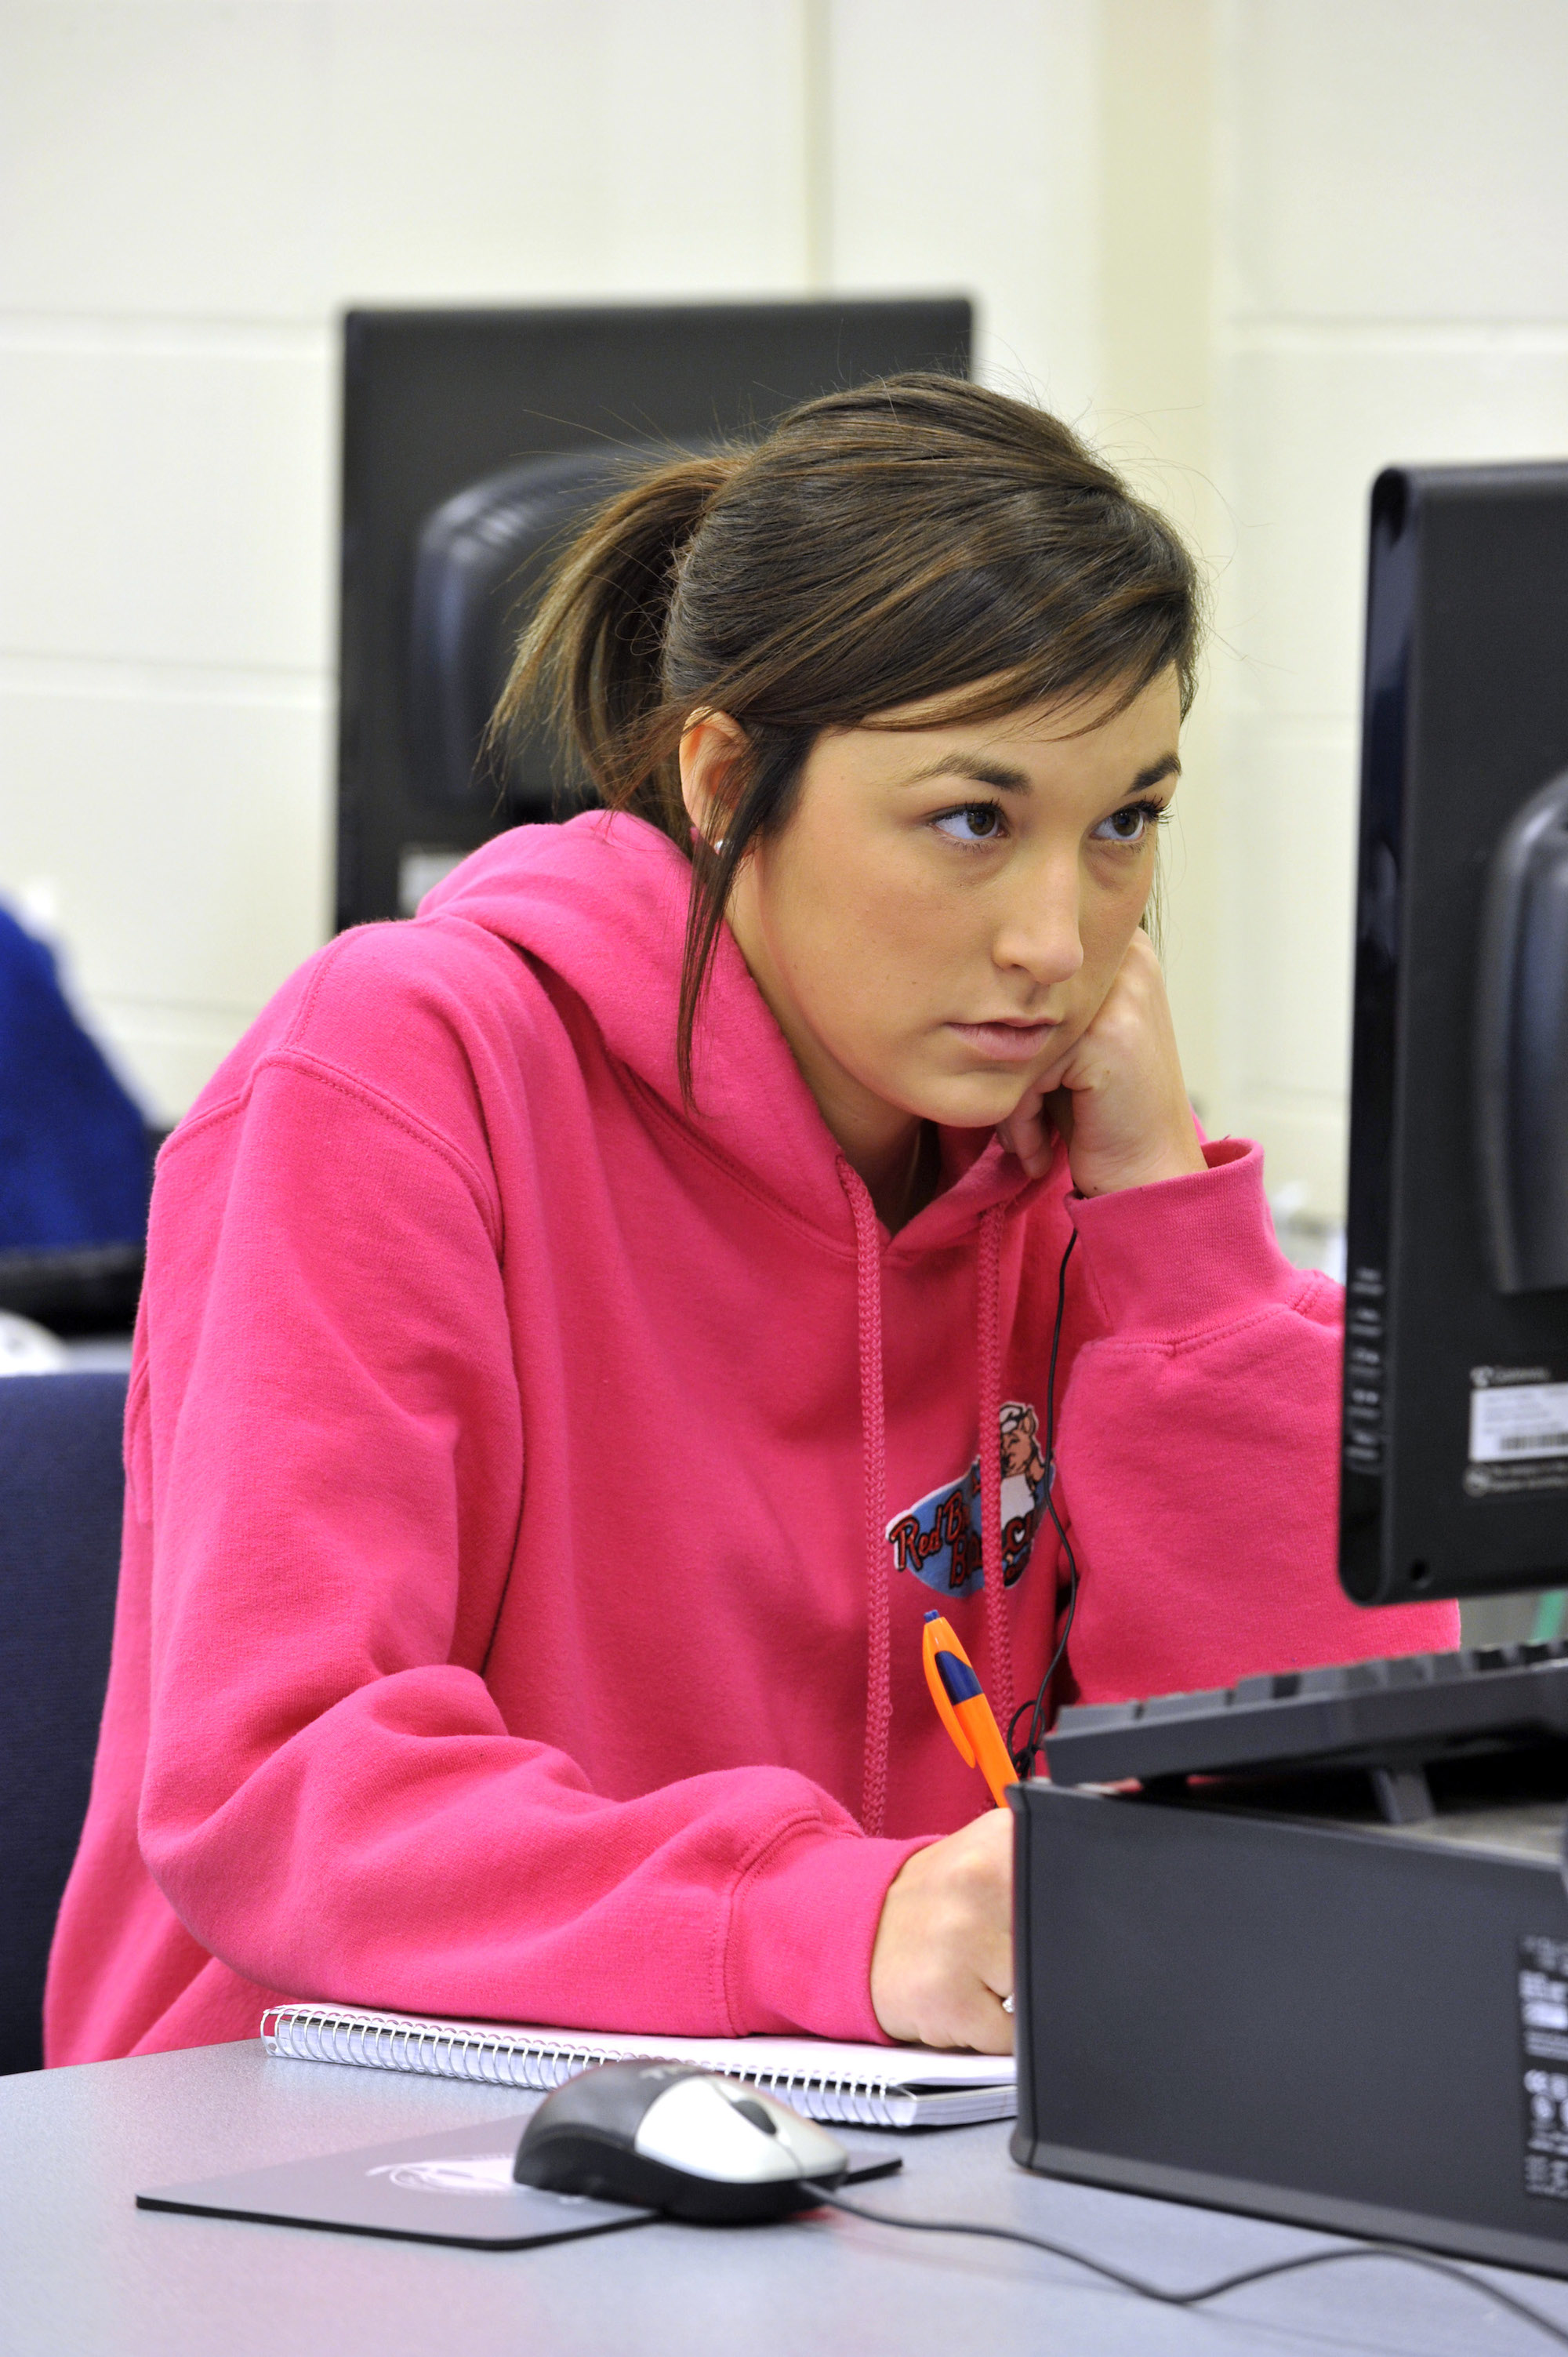 Female students looks at computer while writing in notebook in computer lab